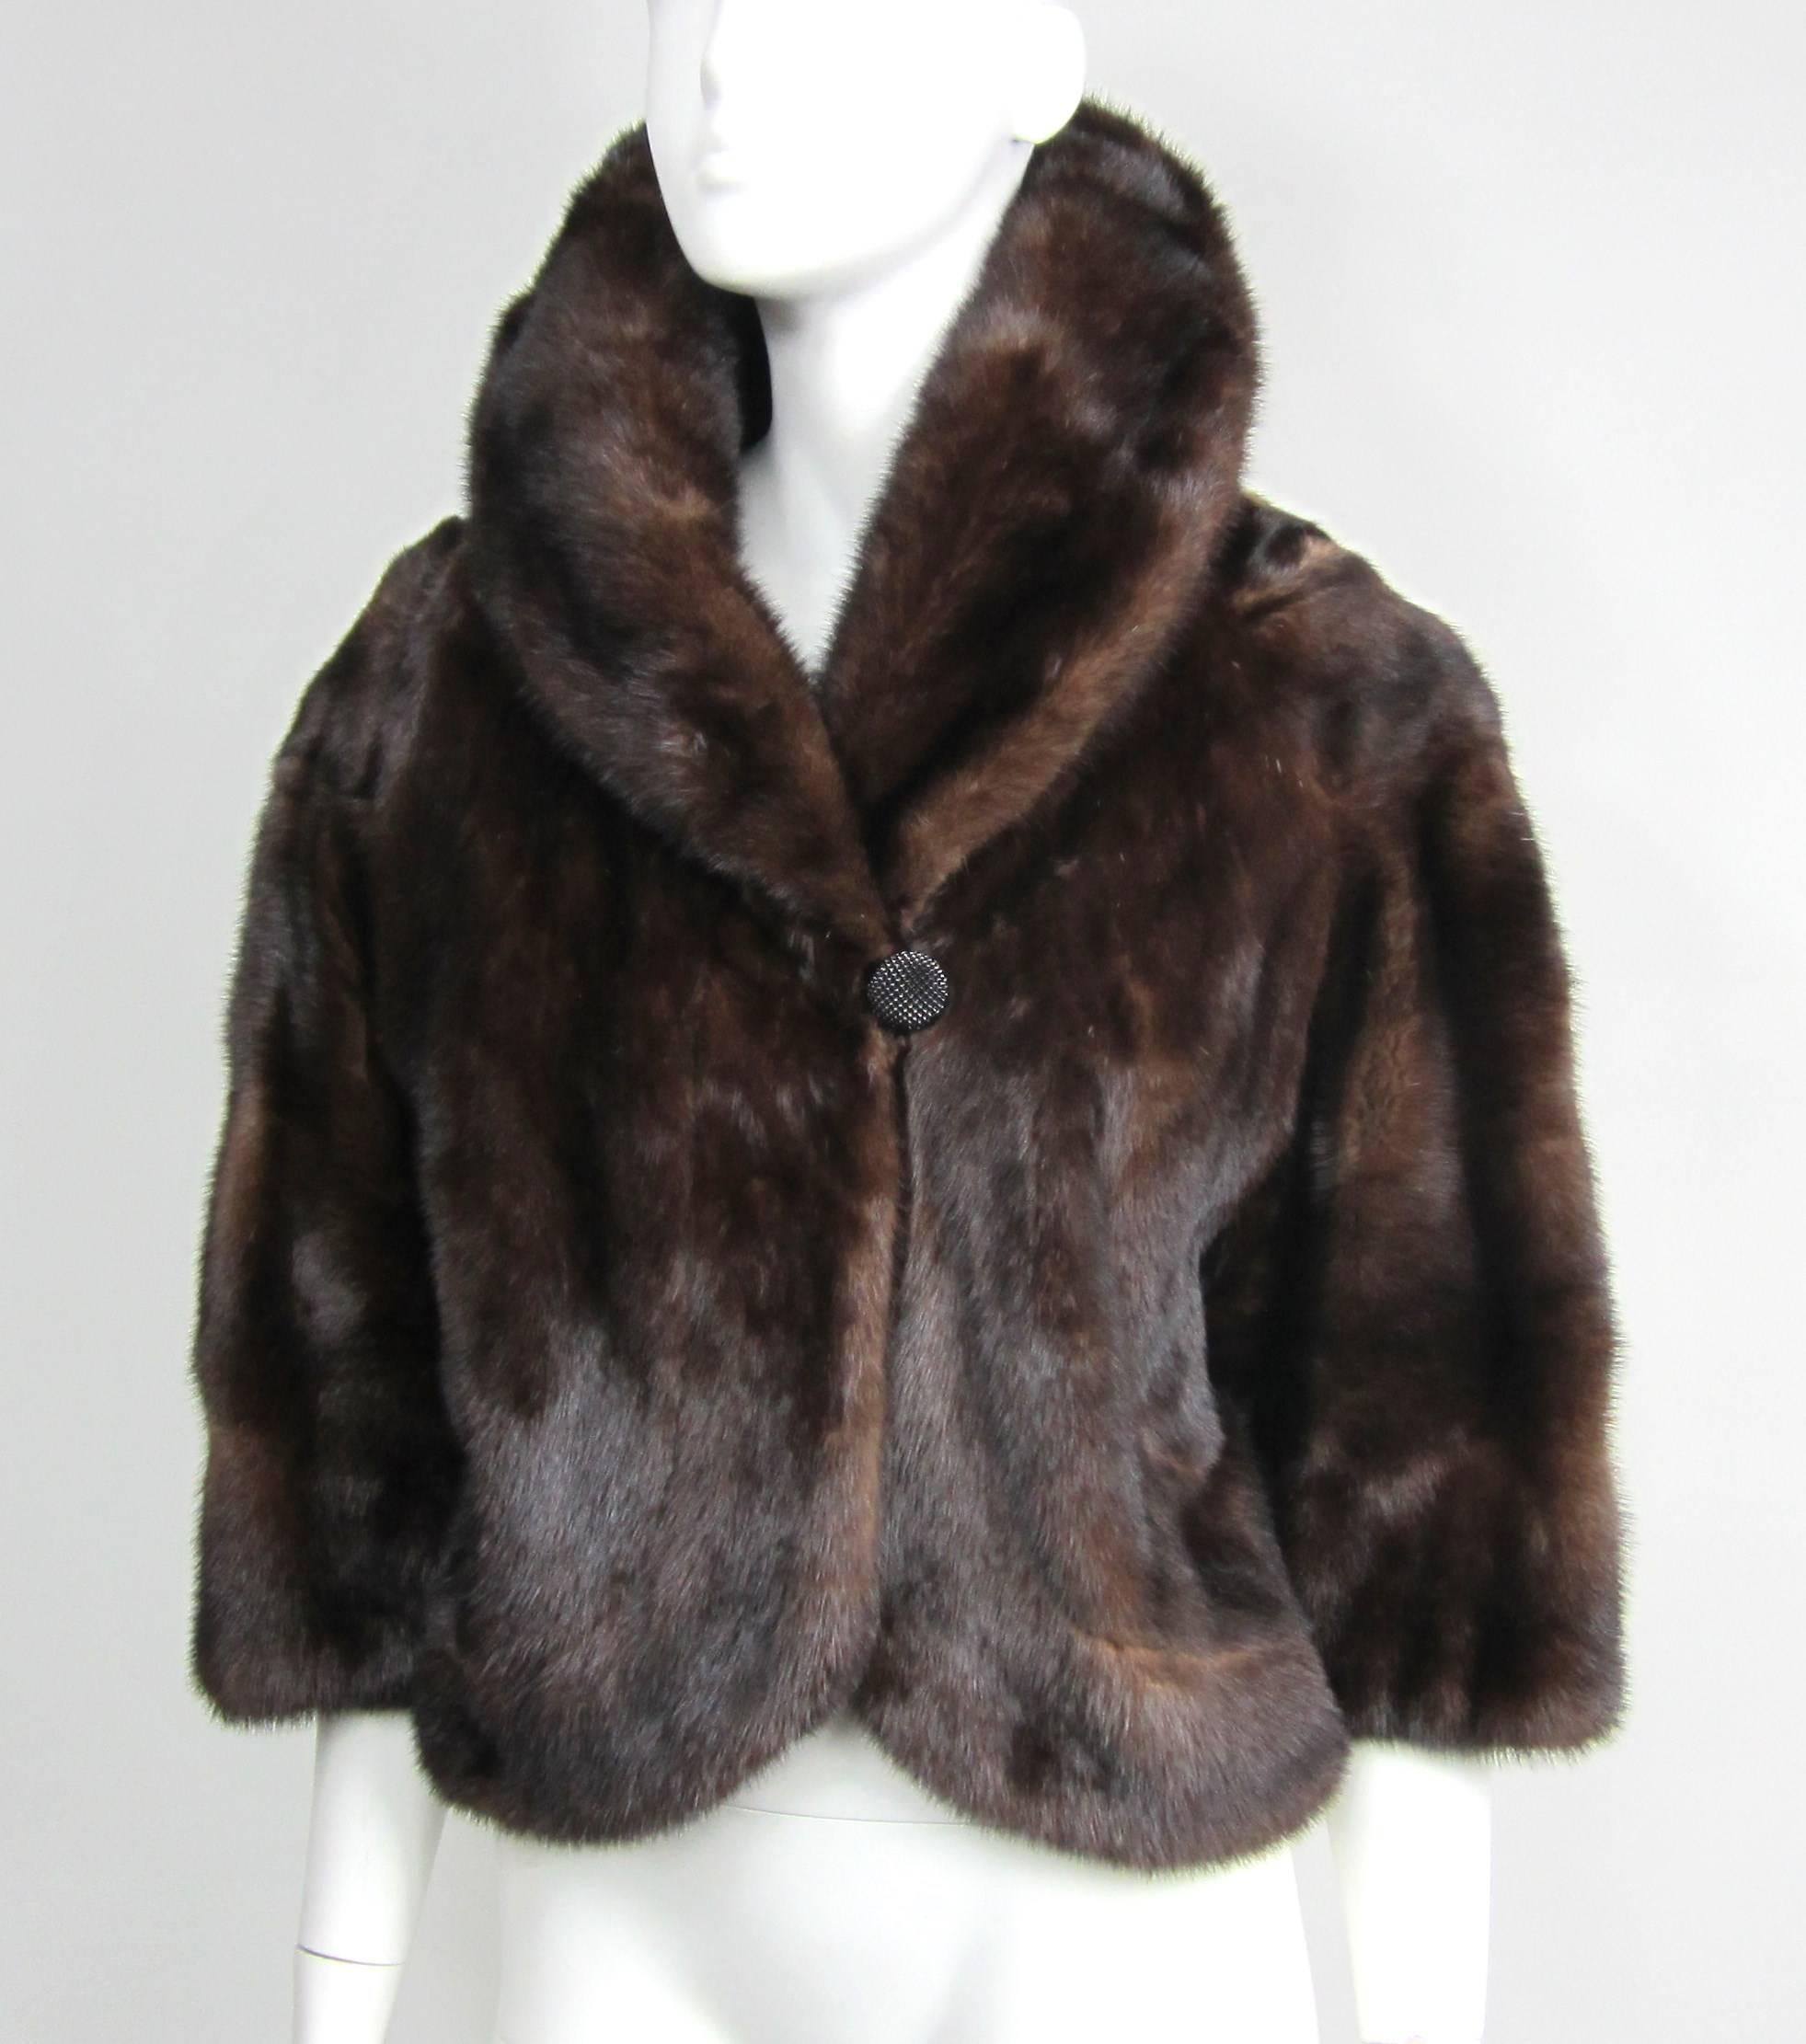 Vintage Deep Chocolate Brown Mink Shrug Jacket Bolero. Soft and supple with no issues. Will fit a medium . Measuring up to 36-inch chest with a 6-inch collar, Length is 21 inches down the back. 3/4 bracelet sleeves. No monogram. One button closure.